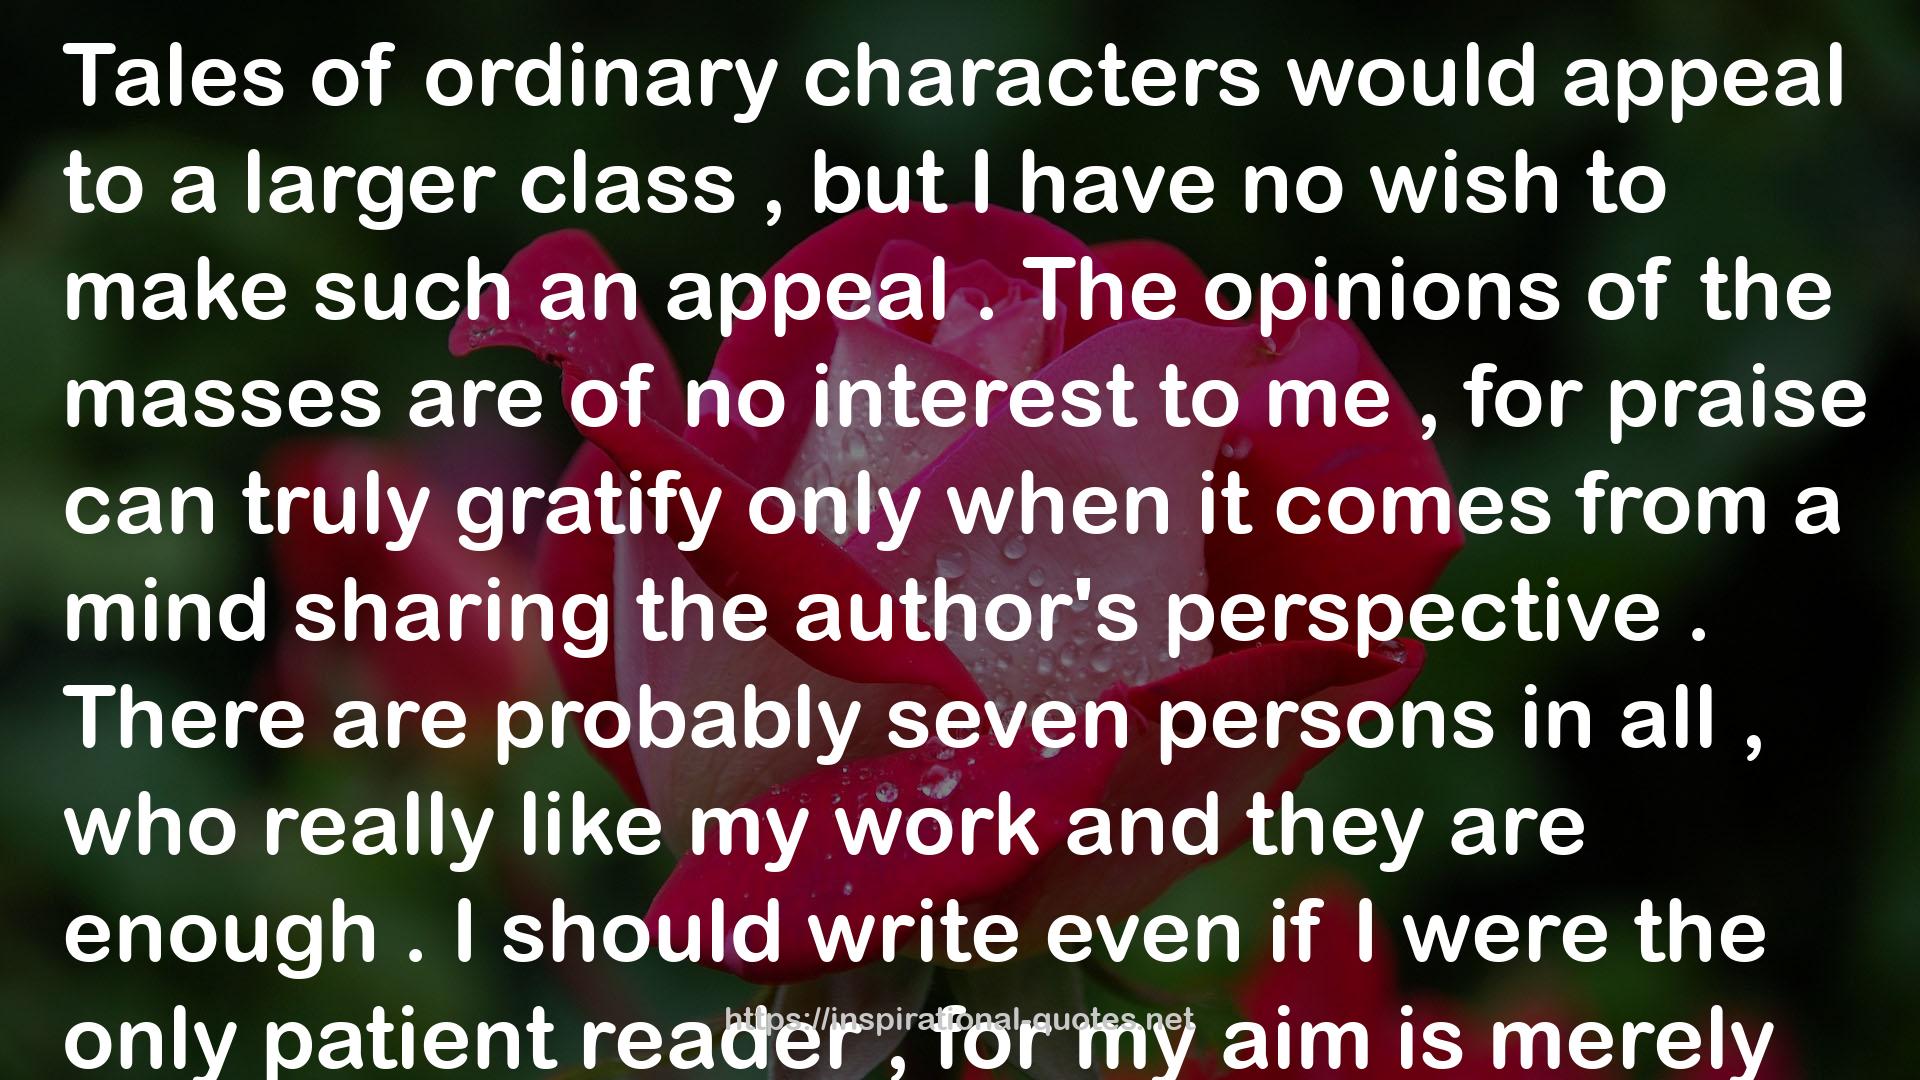 a larger class  QUOTES